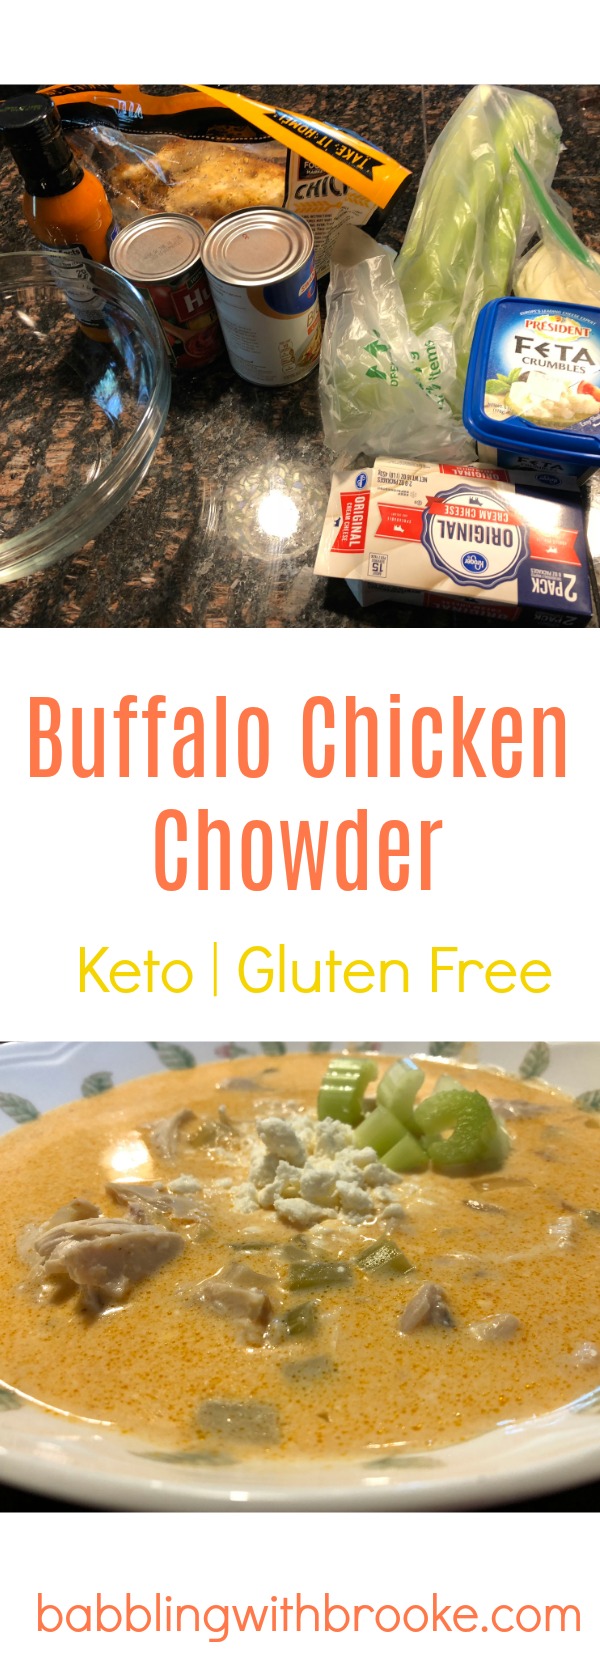 This easy keto dinner recipe is delicious and will be loved by the entire family! Great recipe for fall and winter to keep warm. #chowderrecipe #ketodinnerrecipe #easyketomeals #fallrecipes #winterrecipes